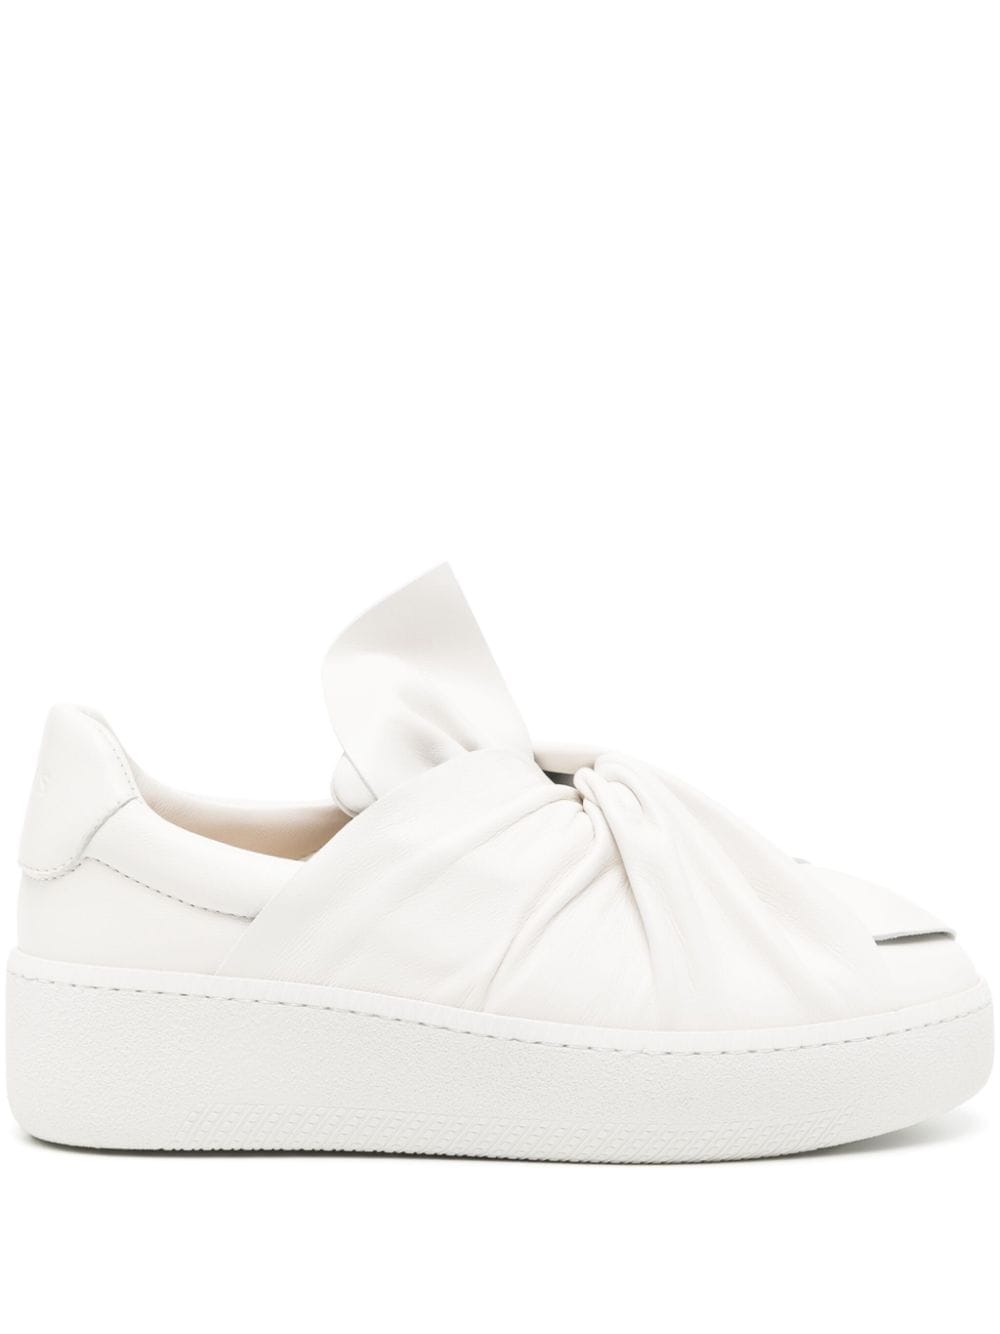 Ports 1961 Bee Leather Sneakers In White